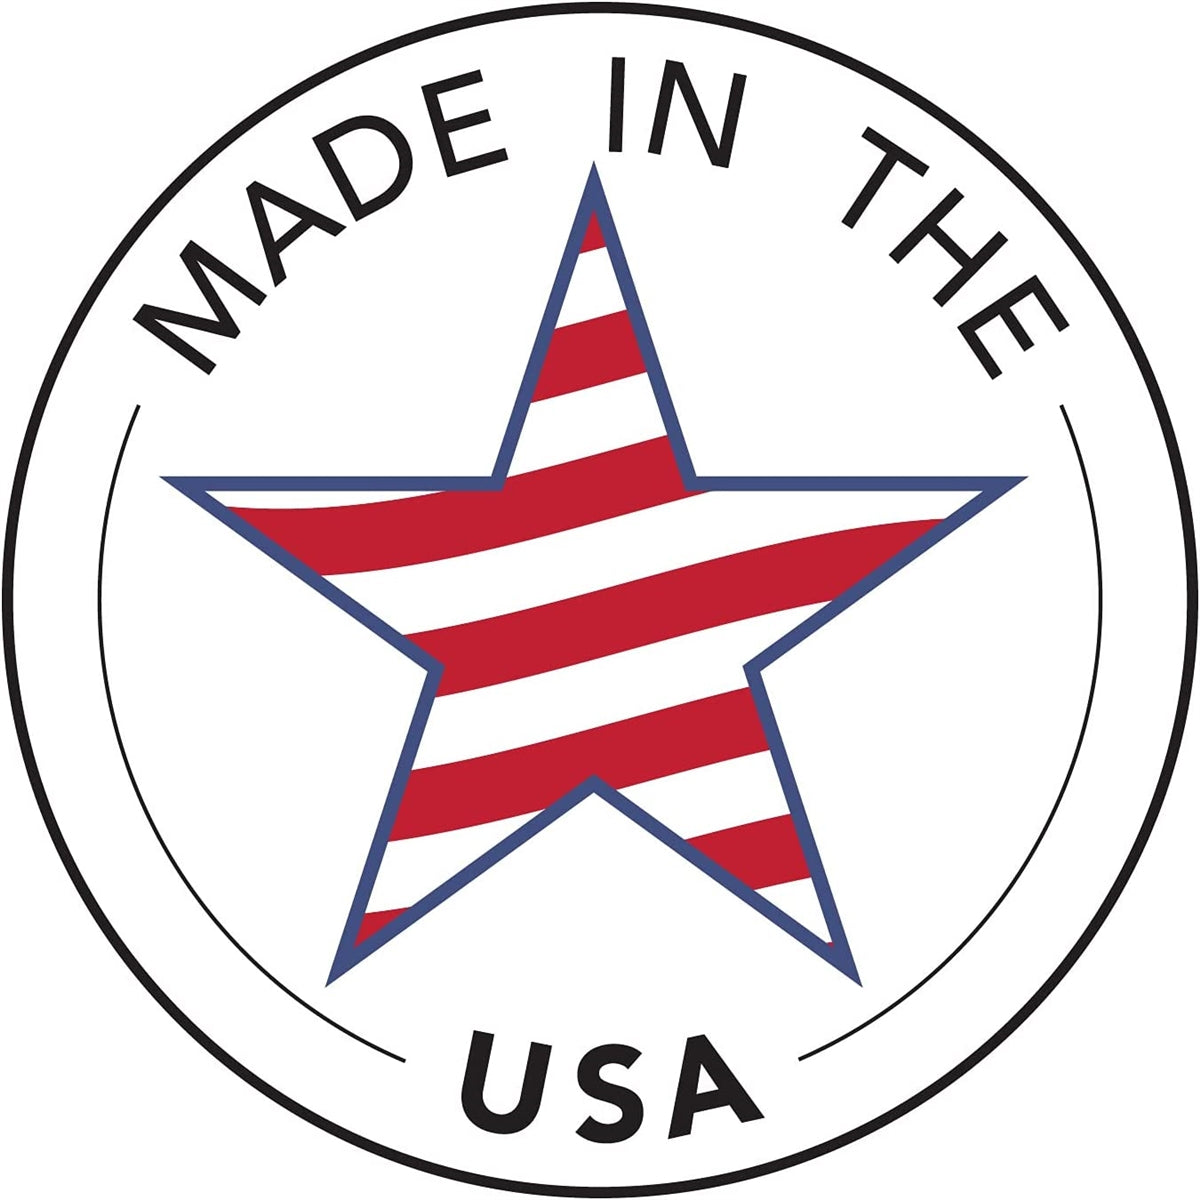 Made in the USA symbol